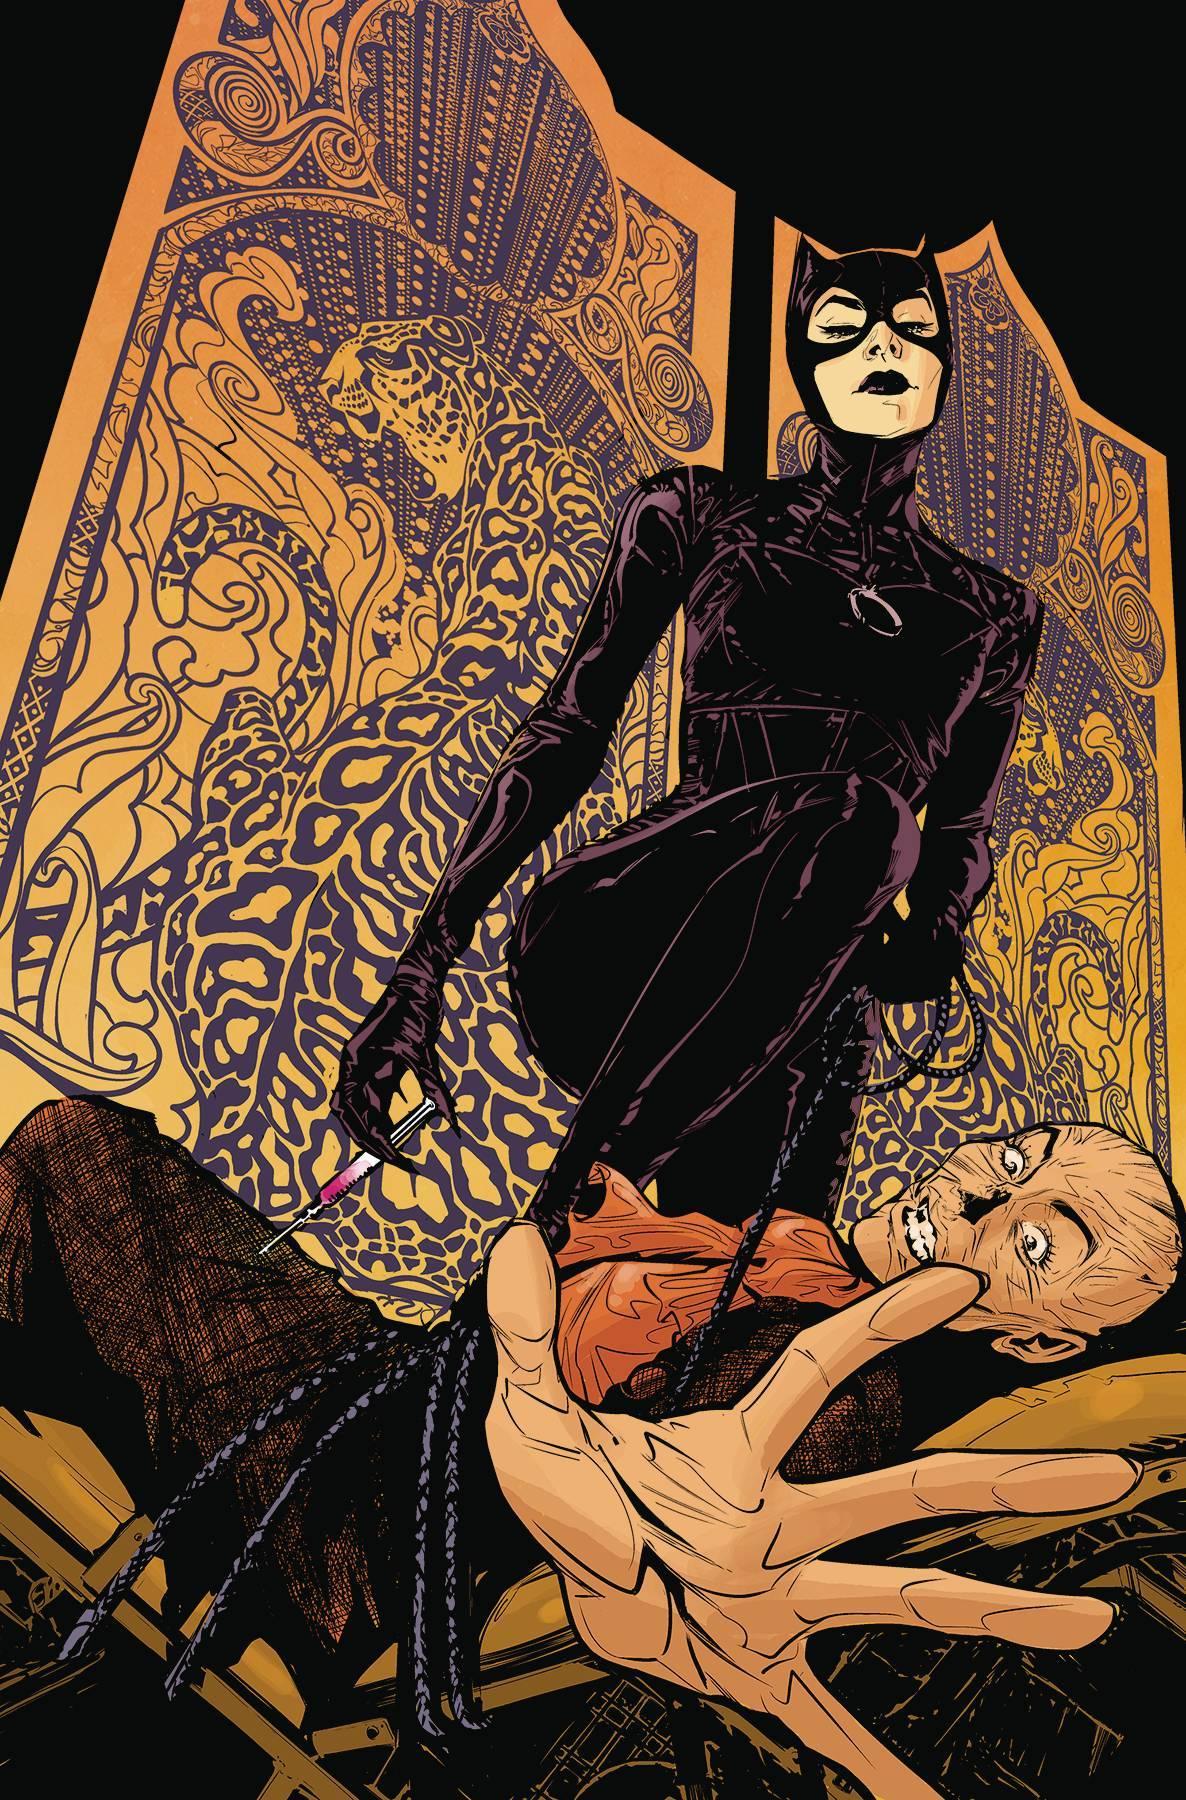 60+ Hot Pictures Of Catwoman From DC Comics 25